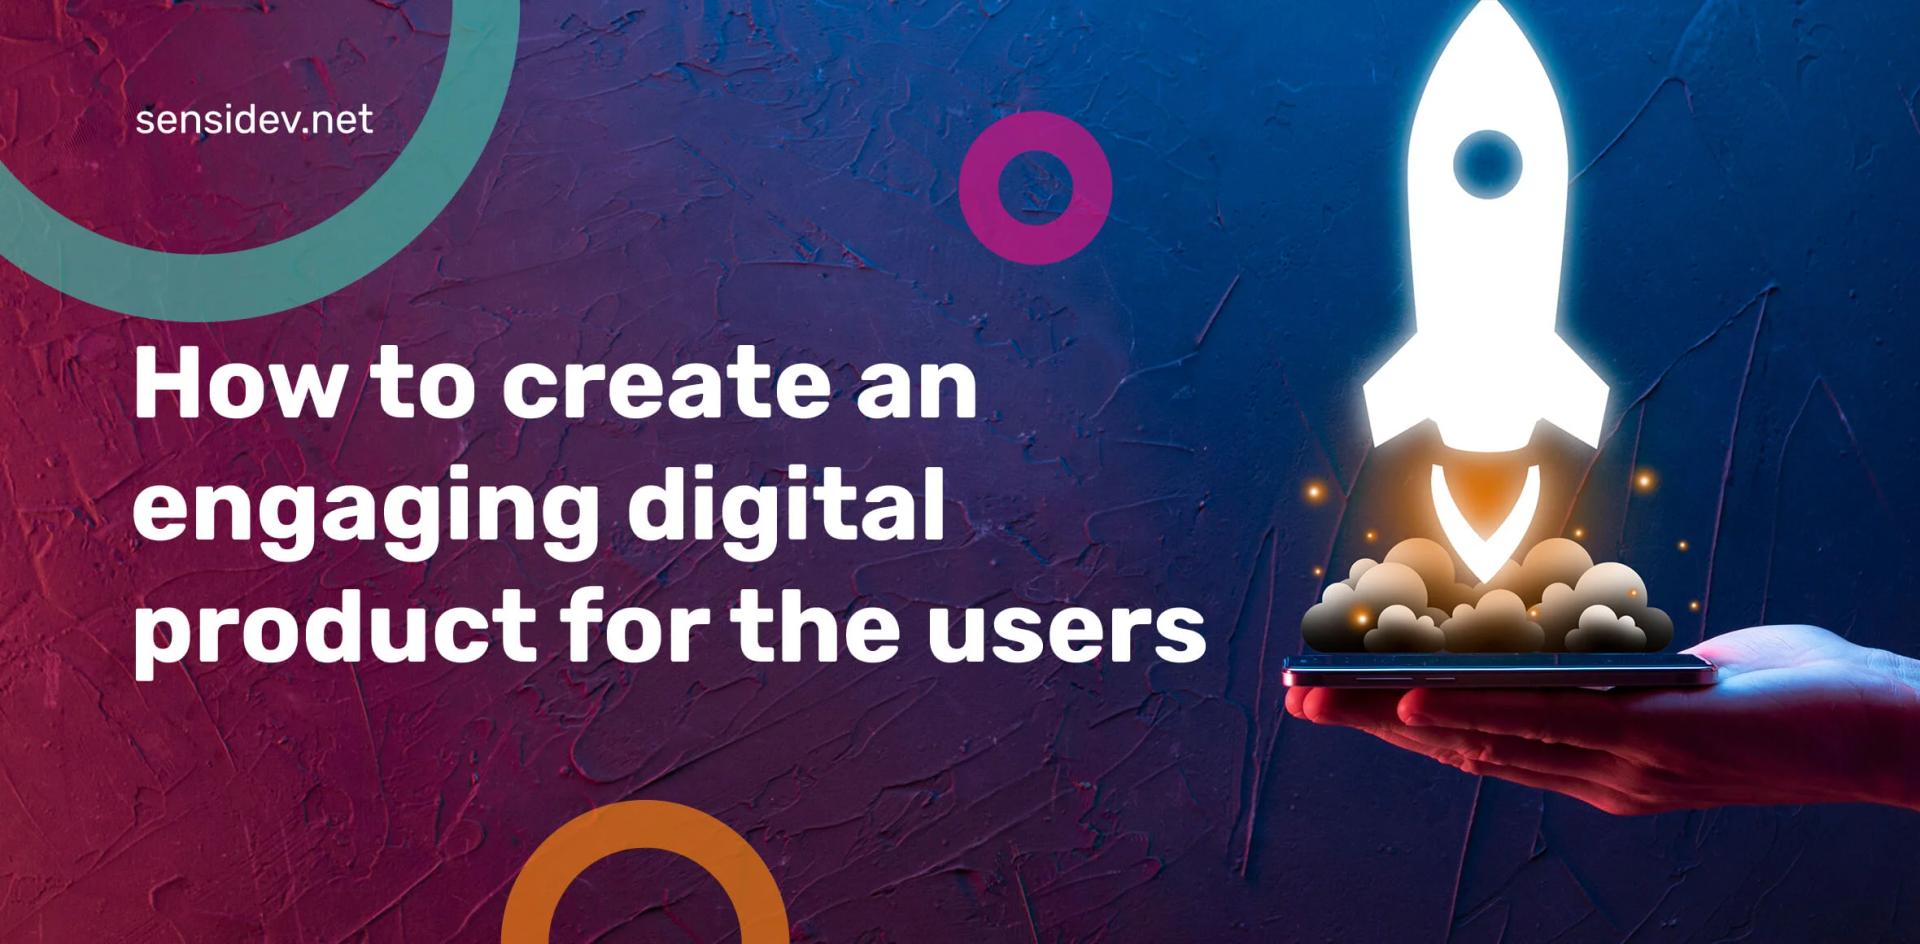 How to create an engaging digital product for the users